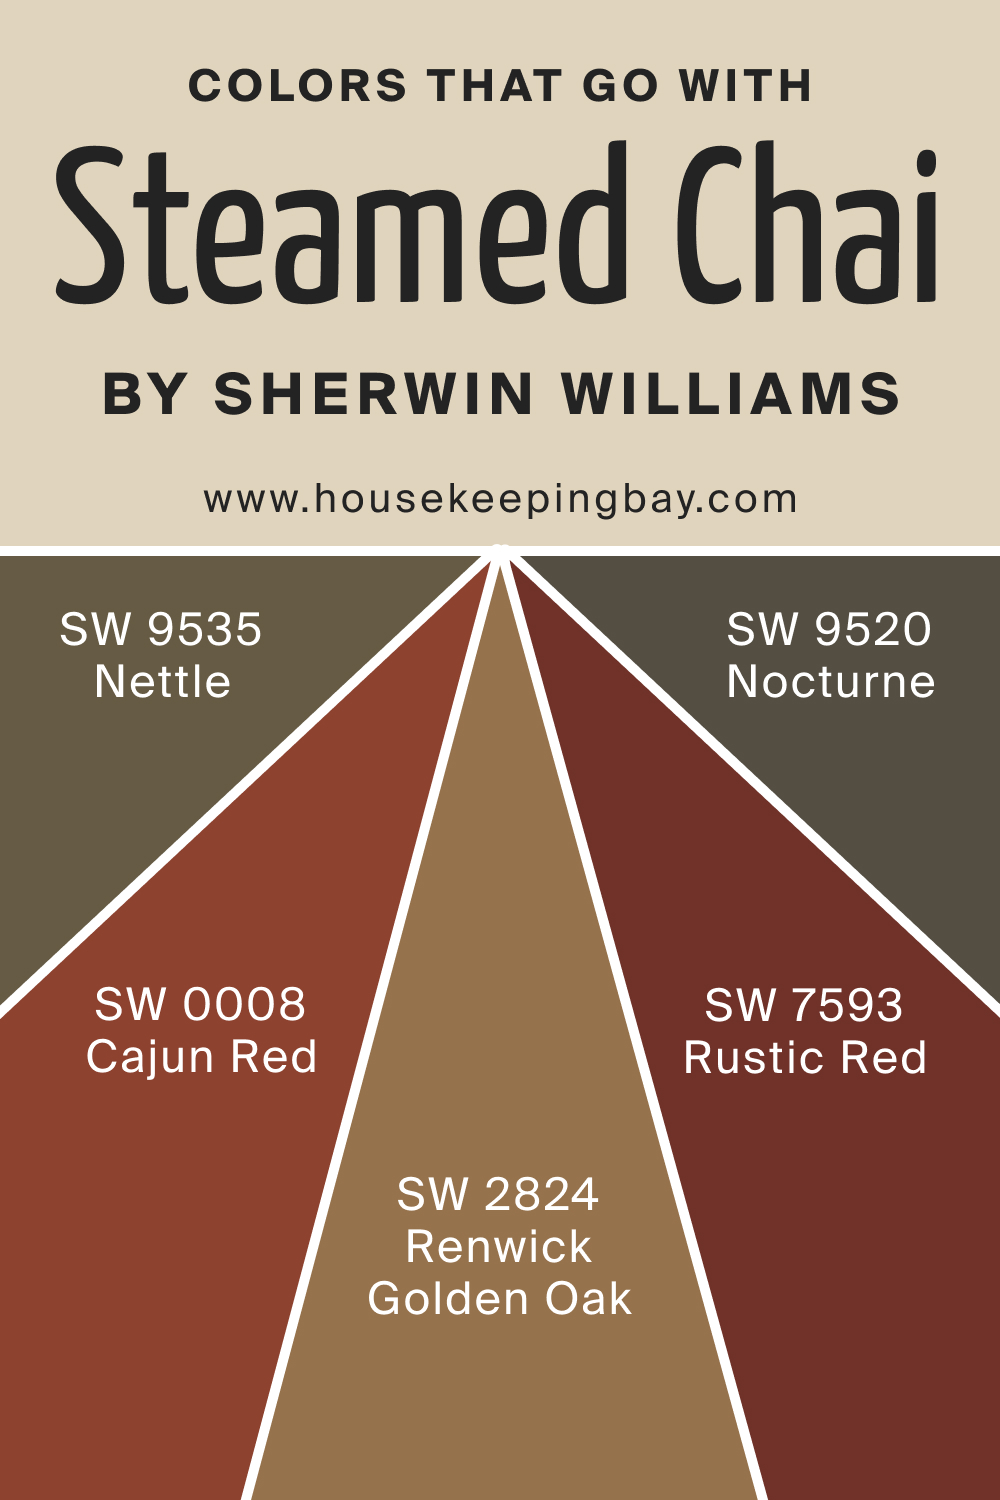 Colors that goes with SW 9509 Steamed Chai by Sherwin Williams